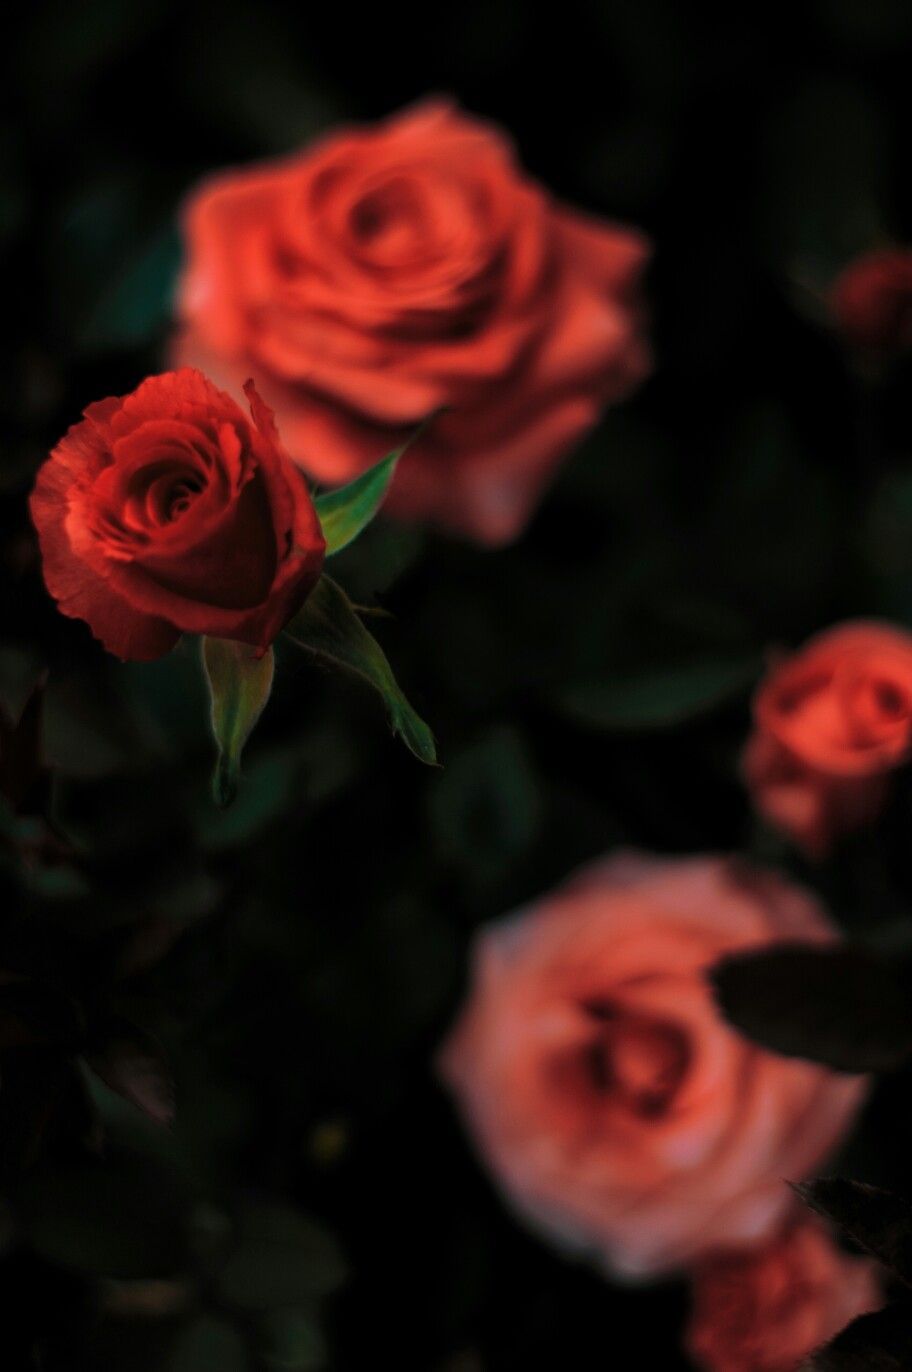 Red Rose Aesthetic Wallpapers